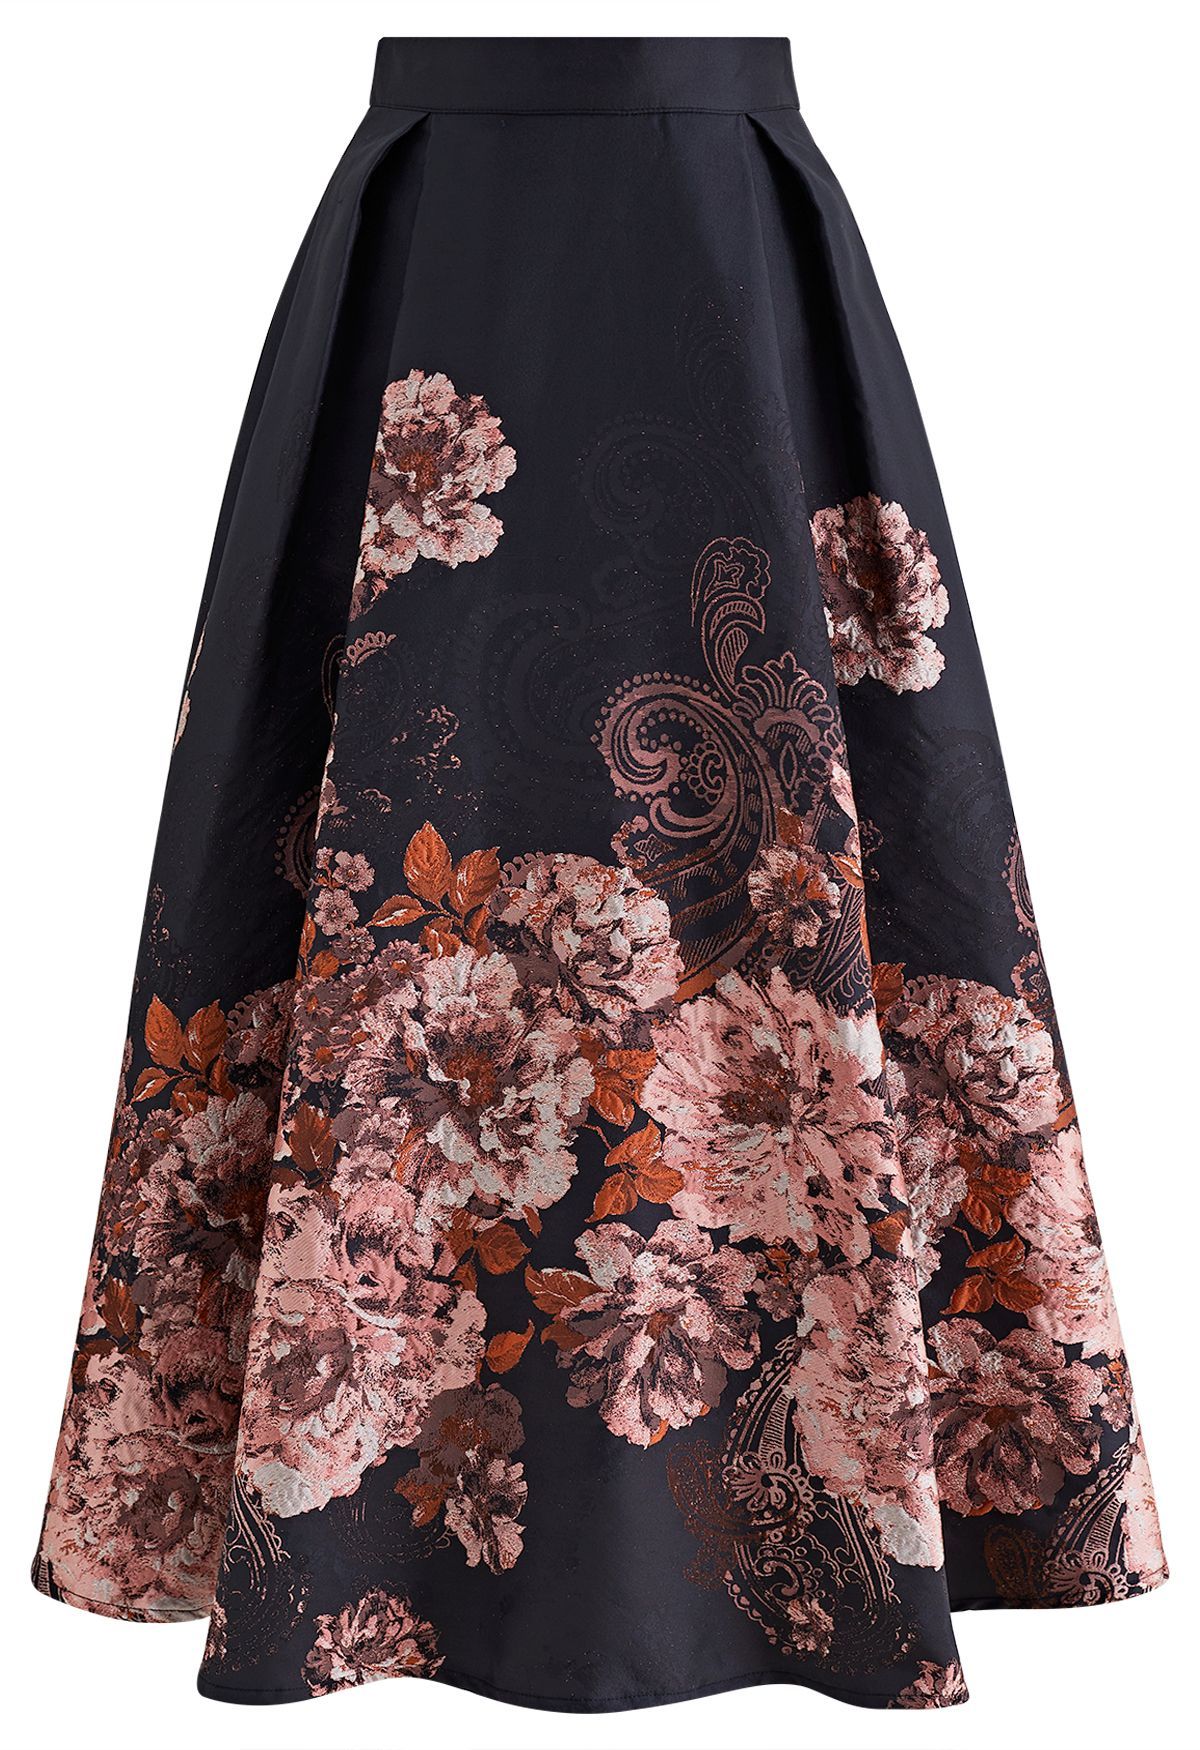 Bewitching Peony Jacquard Flare Skirt in Black | Chicwish